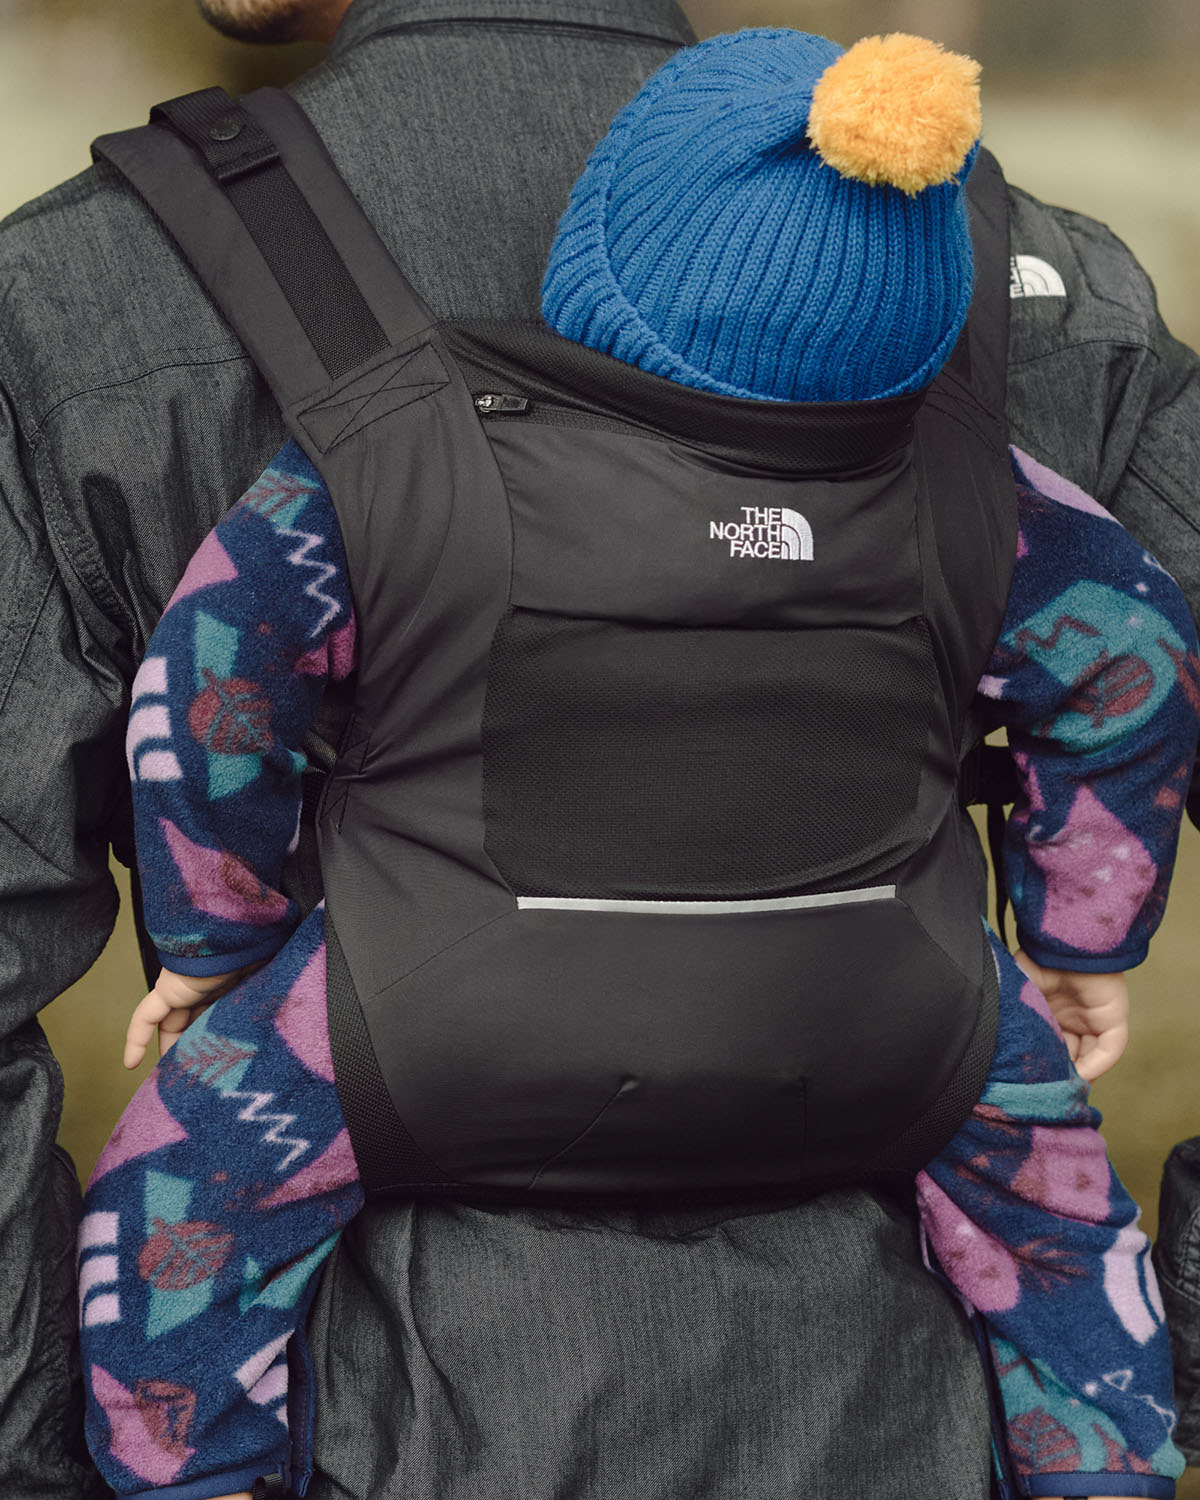 The North Face Japan's Baby Carrier Is For Cool Parents